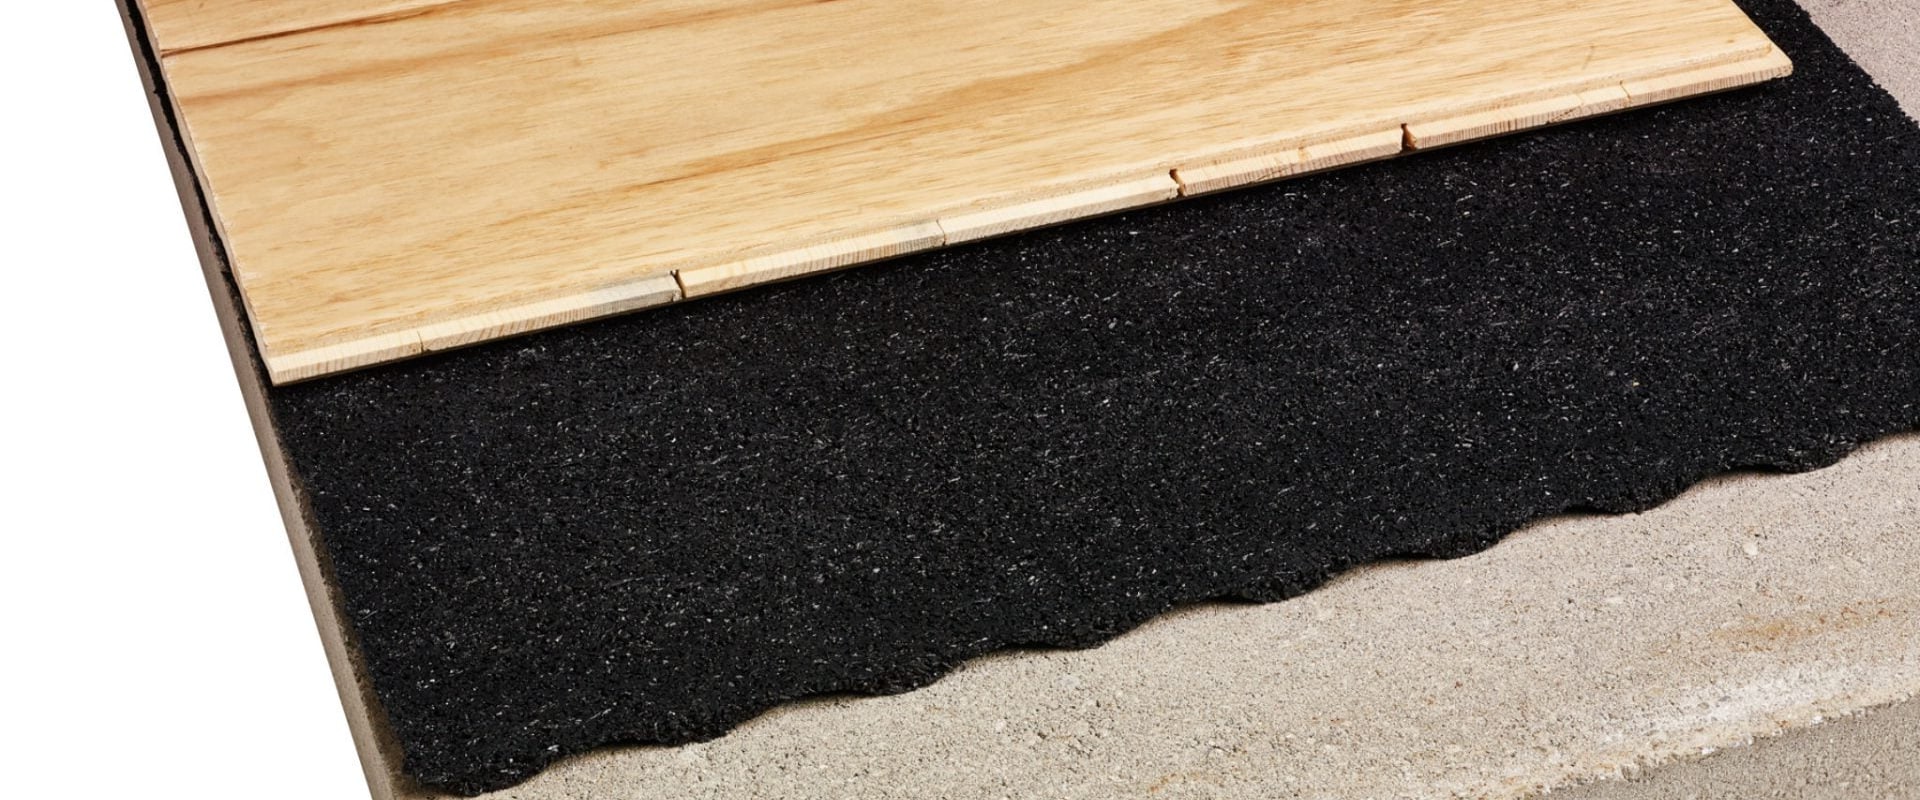 What is the Warranty for Acoustic Underlay Products?